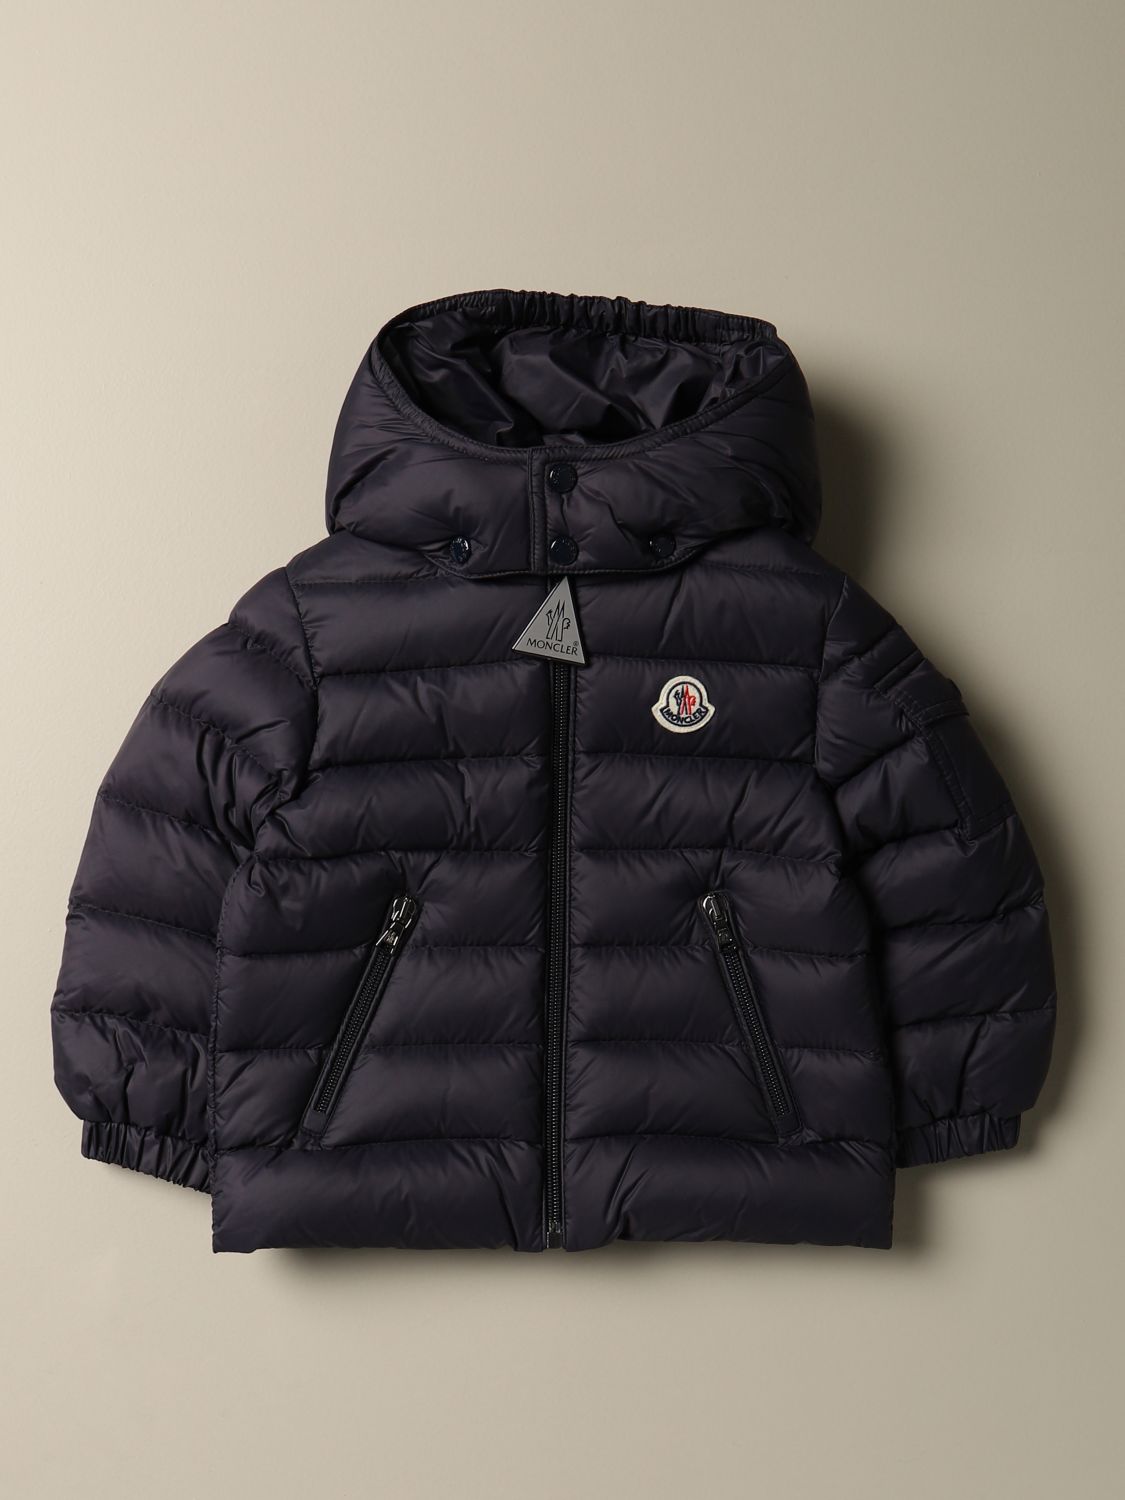 Moncler Down Top Sellers, 54% OFF | www.hcb.cat